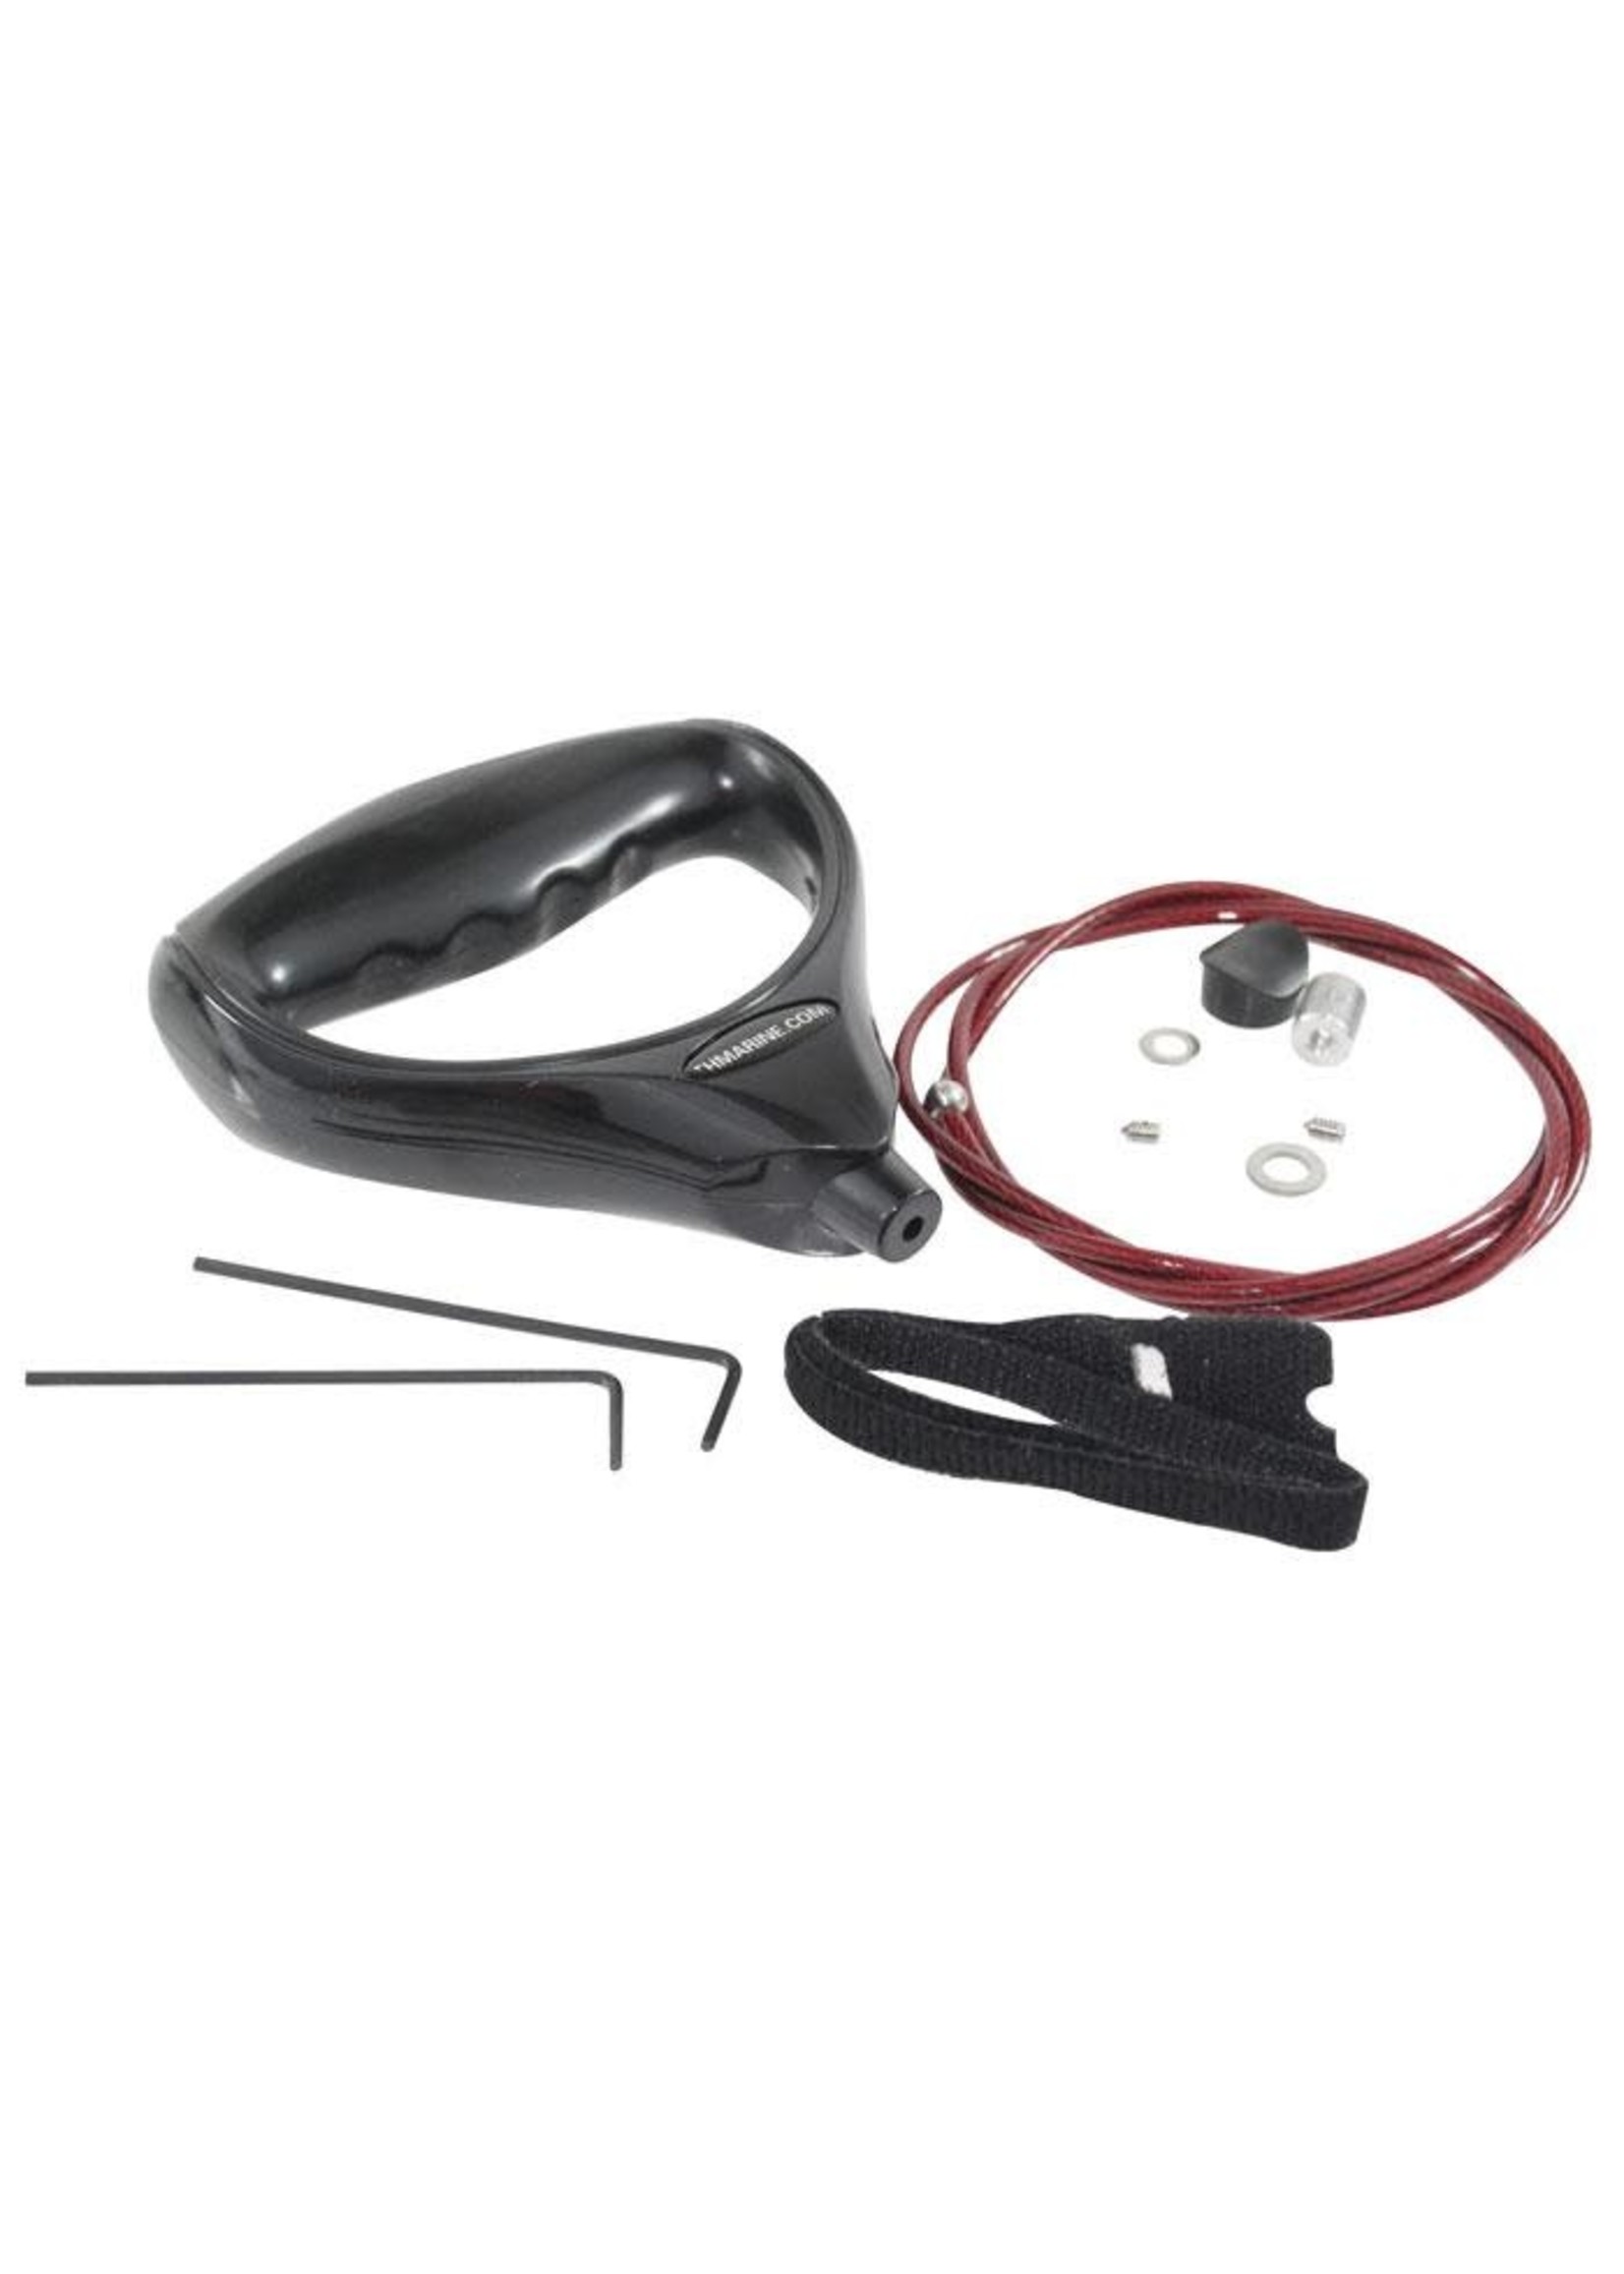 TH MARINE G-FORCE HANDLE AND CABLE